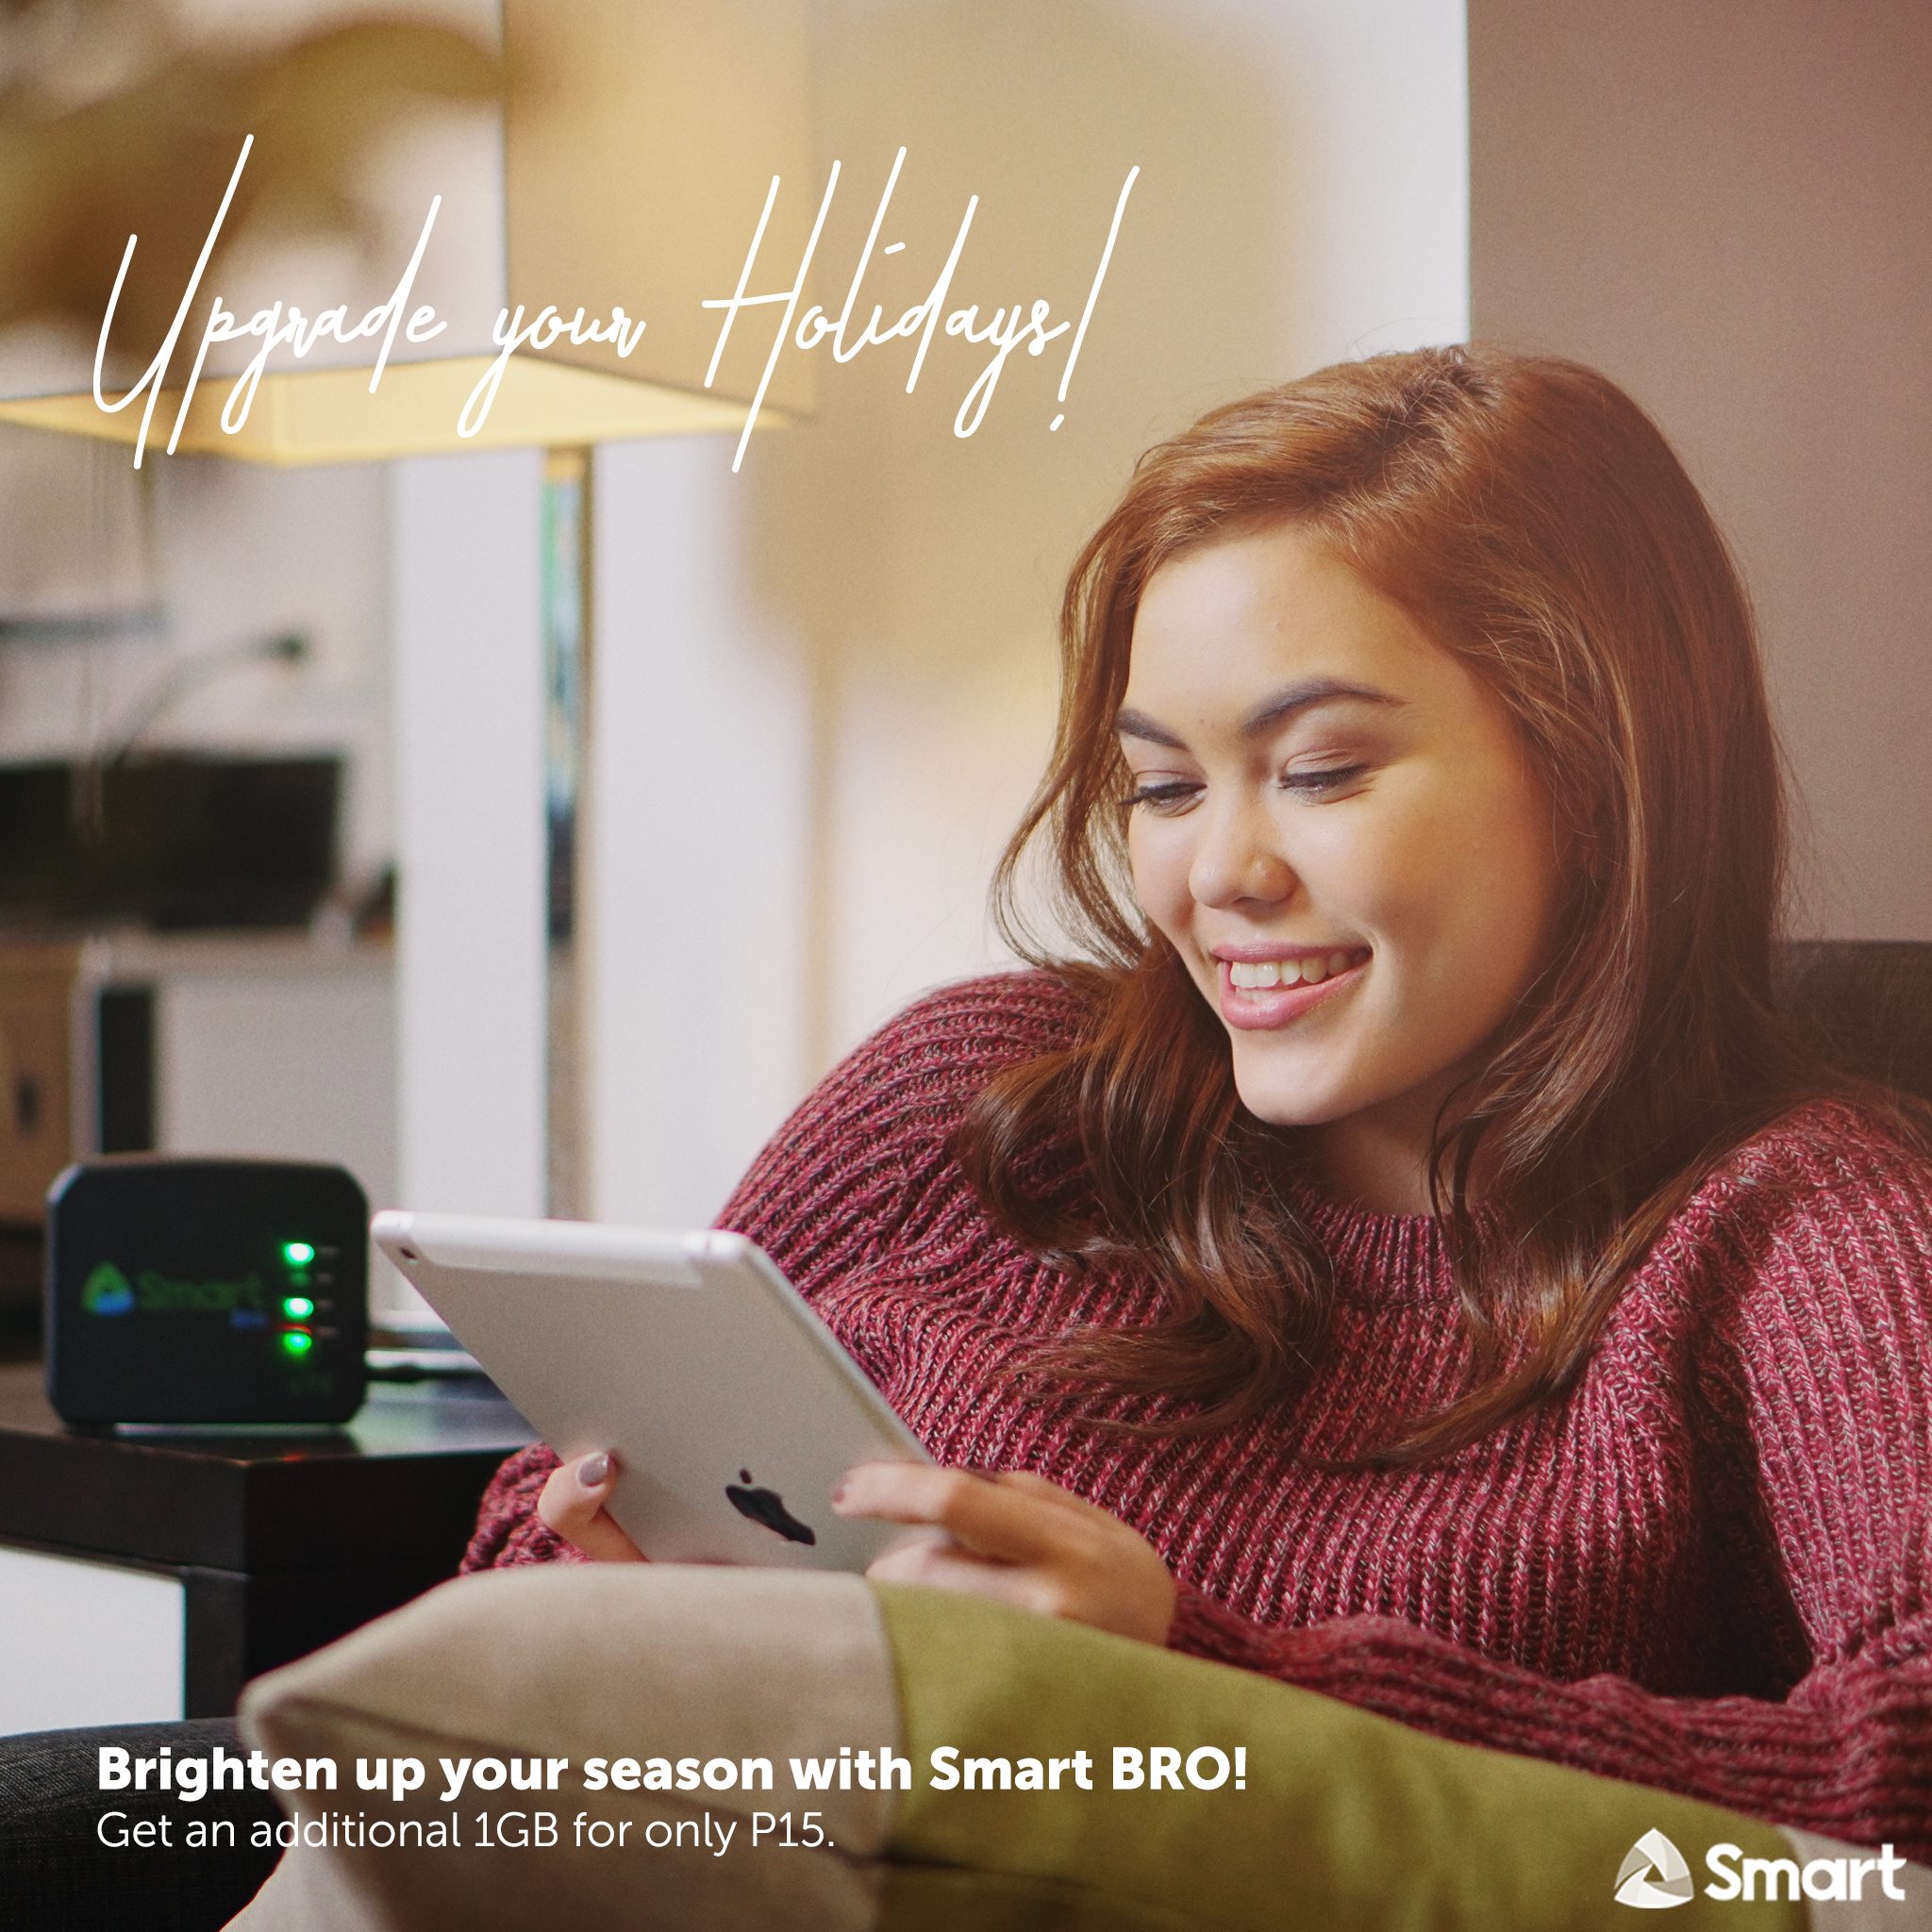 Smart Bro Prepaid rolls out new promo for LTE Home WiFi subscribers